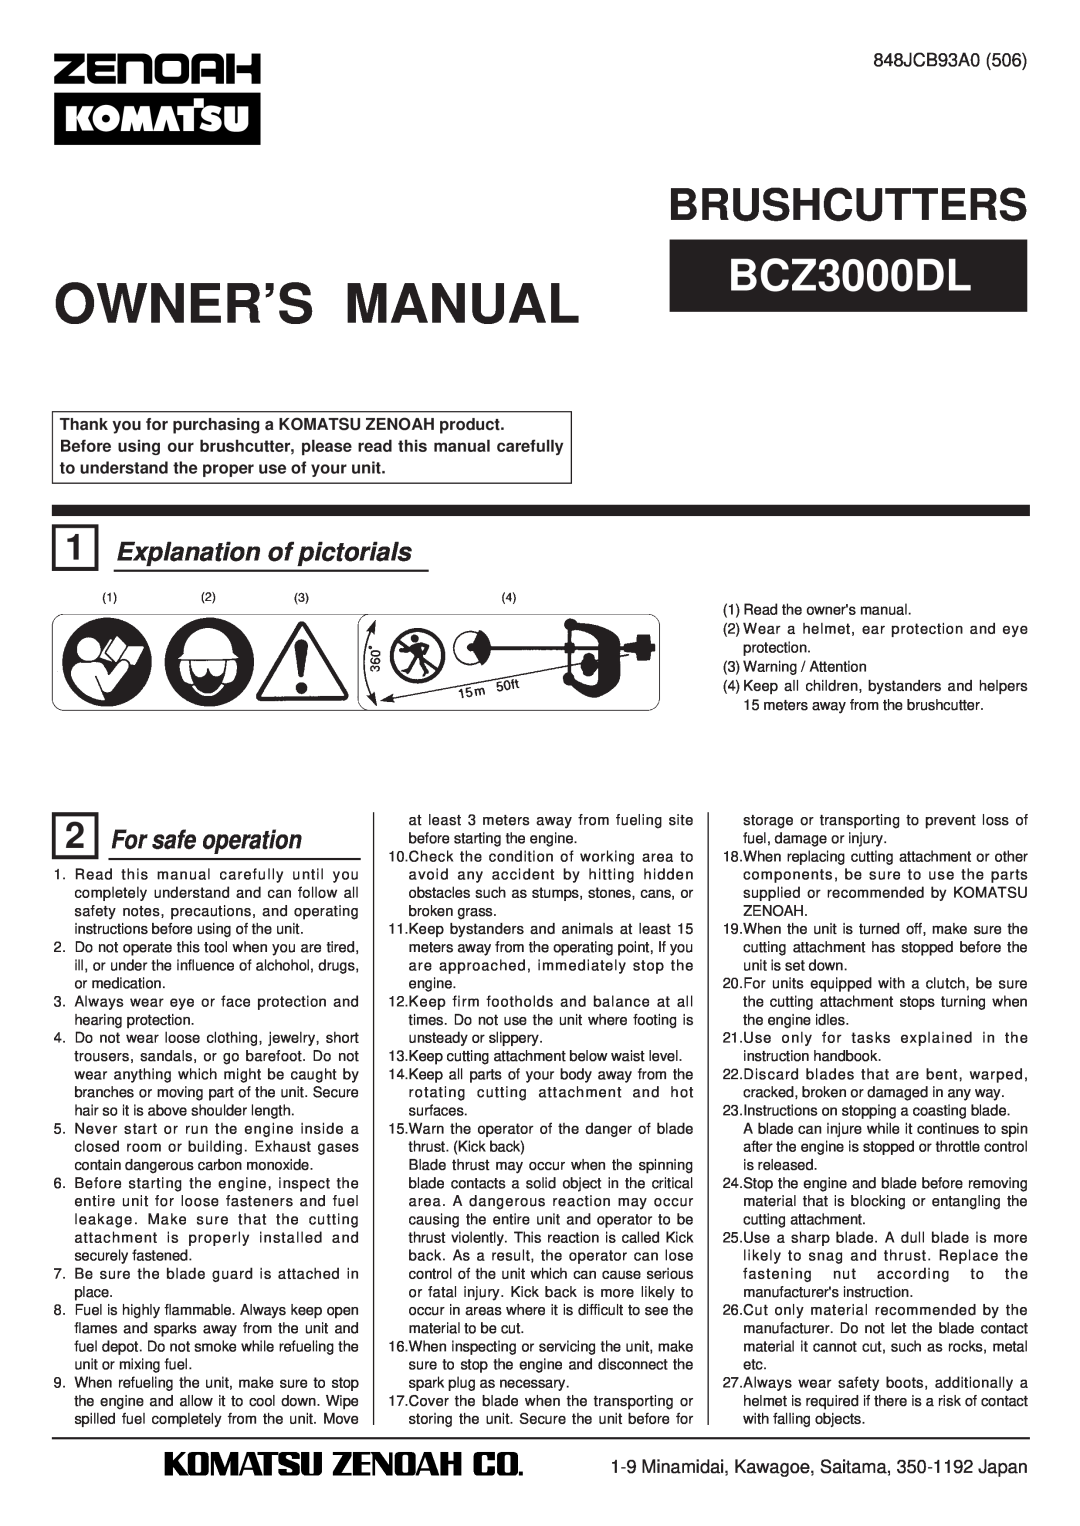 Zenoah BCZ3000DL owner manual Explanation of pictorials, For safe operation, Brushcutters, 848JCB93A0 